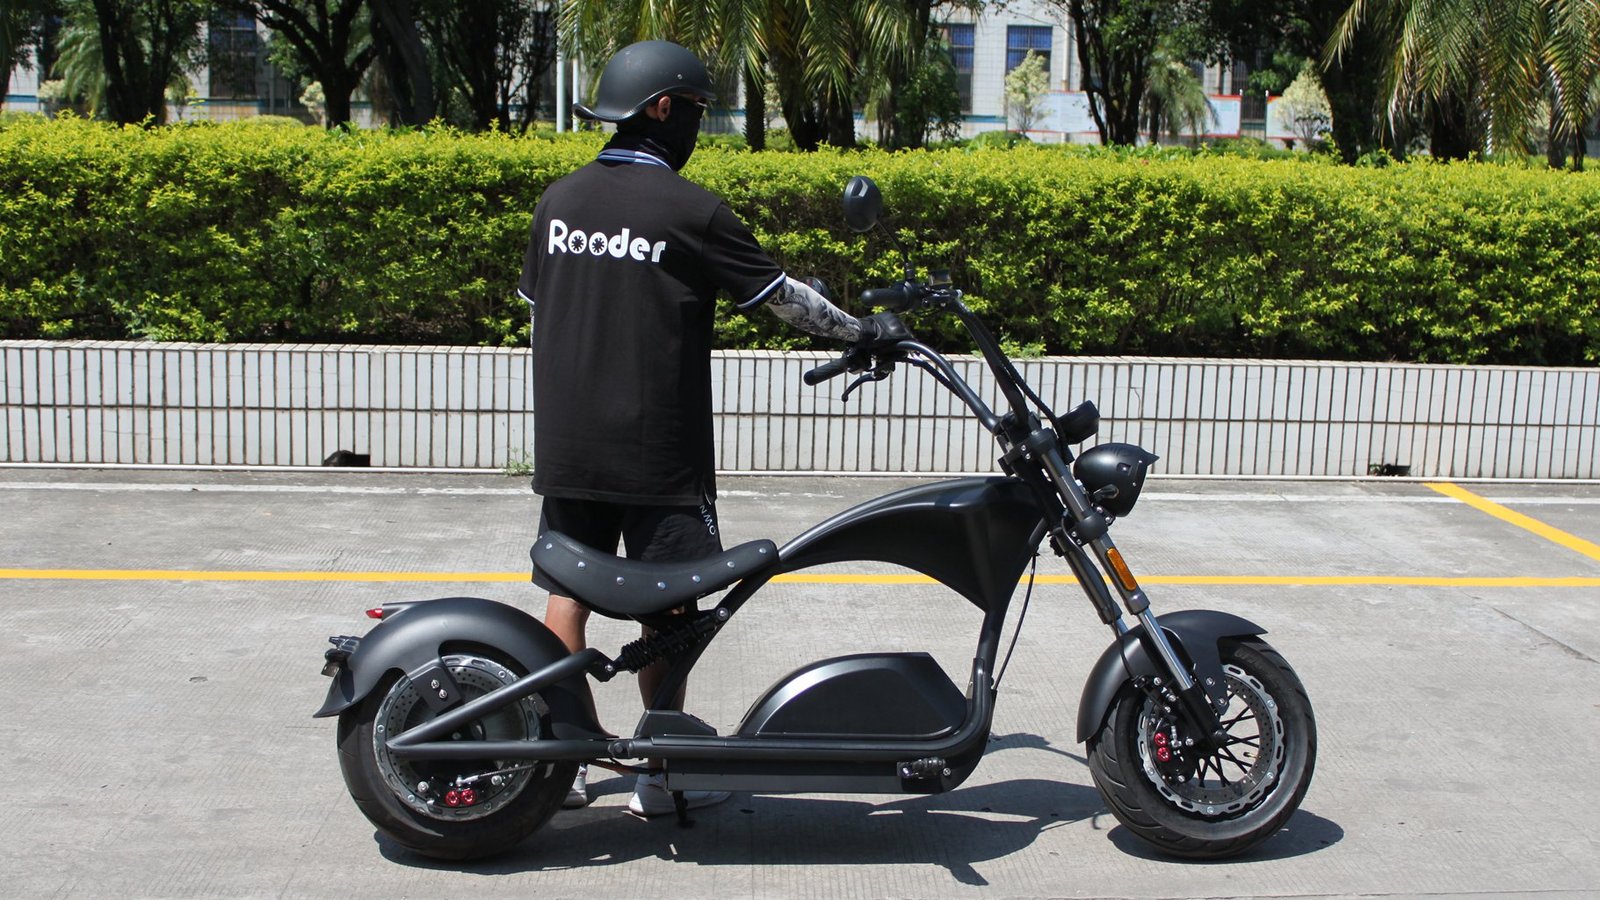 Rooder Mangosteen Sara M1ps 72v 4000w citycoco chopper electric motorcycle scooter (14)